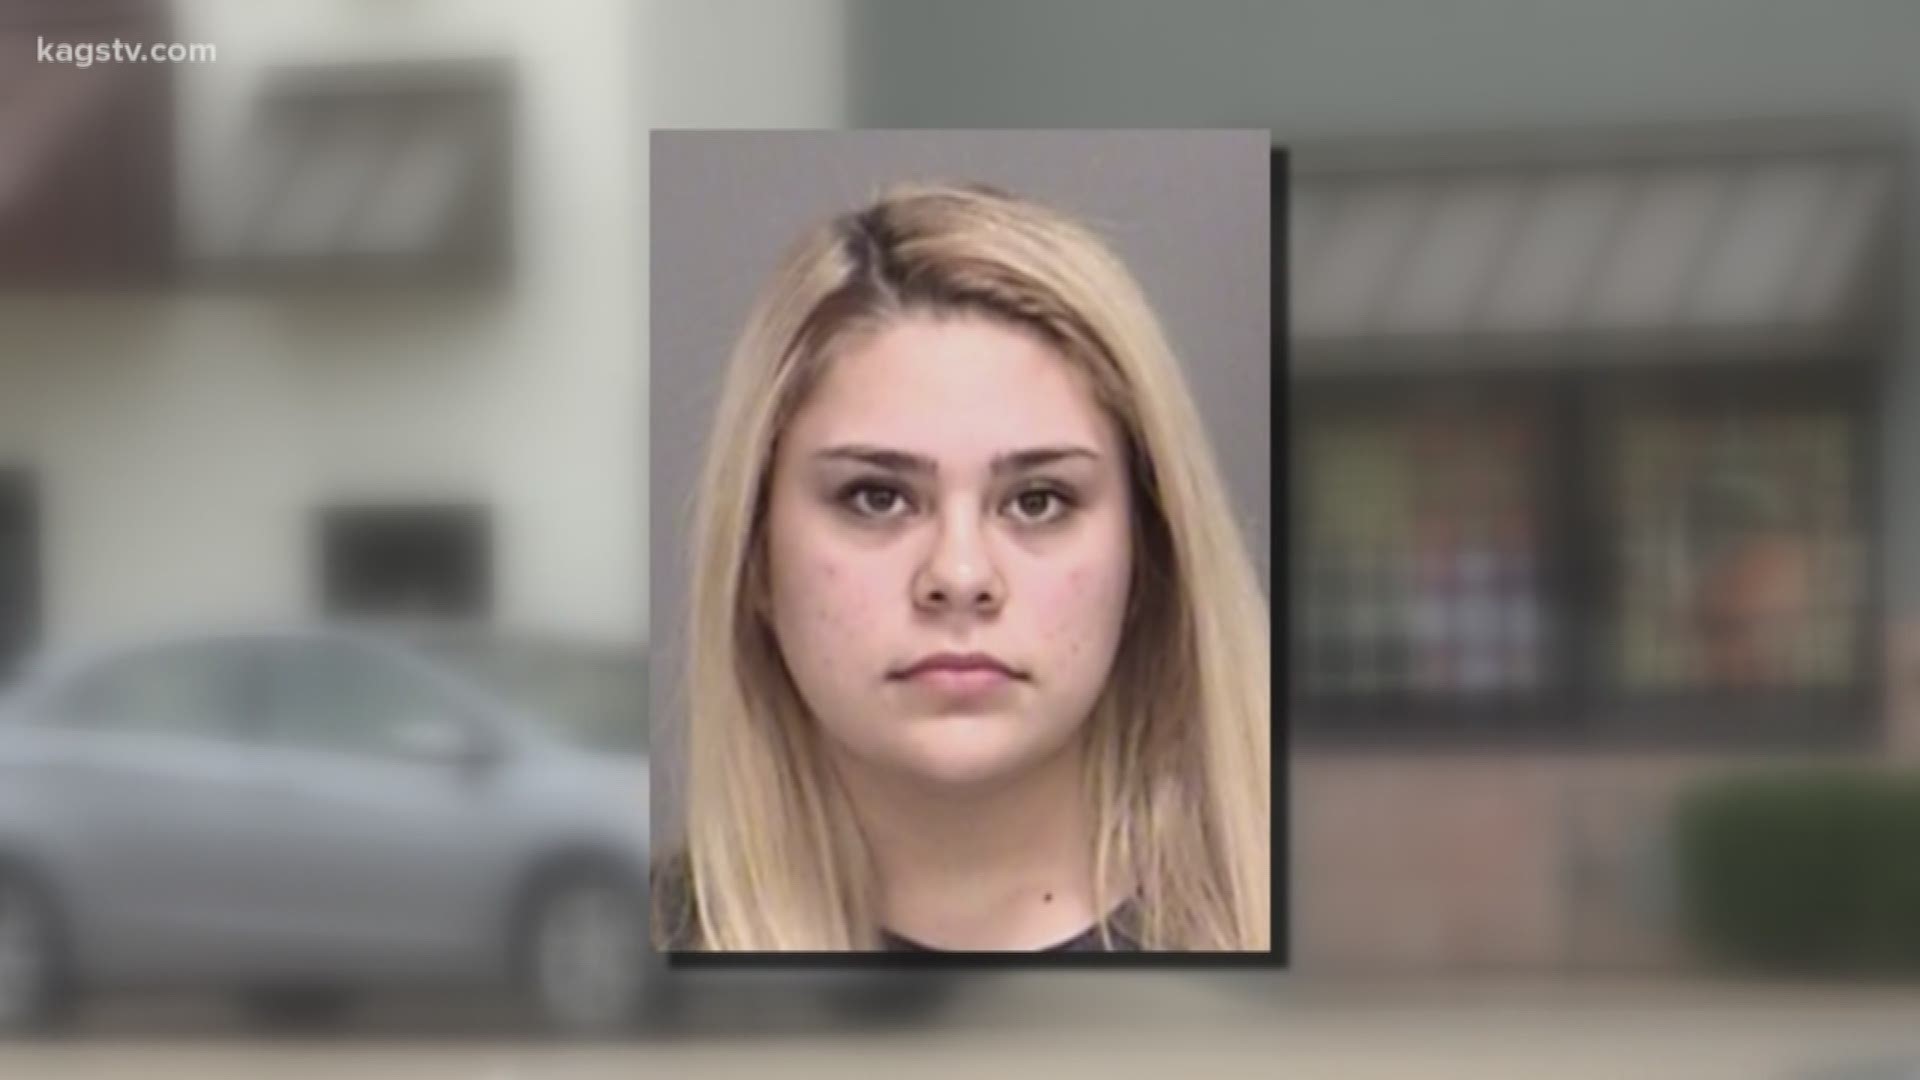 The case of a Snapchat drug deal gone bad continues to unravel as more people are being charged in the case.